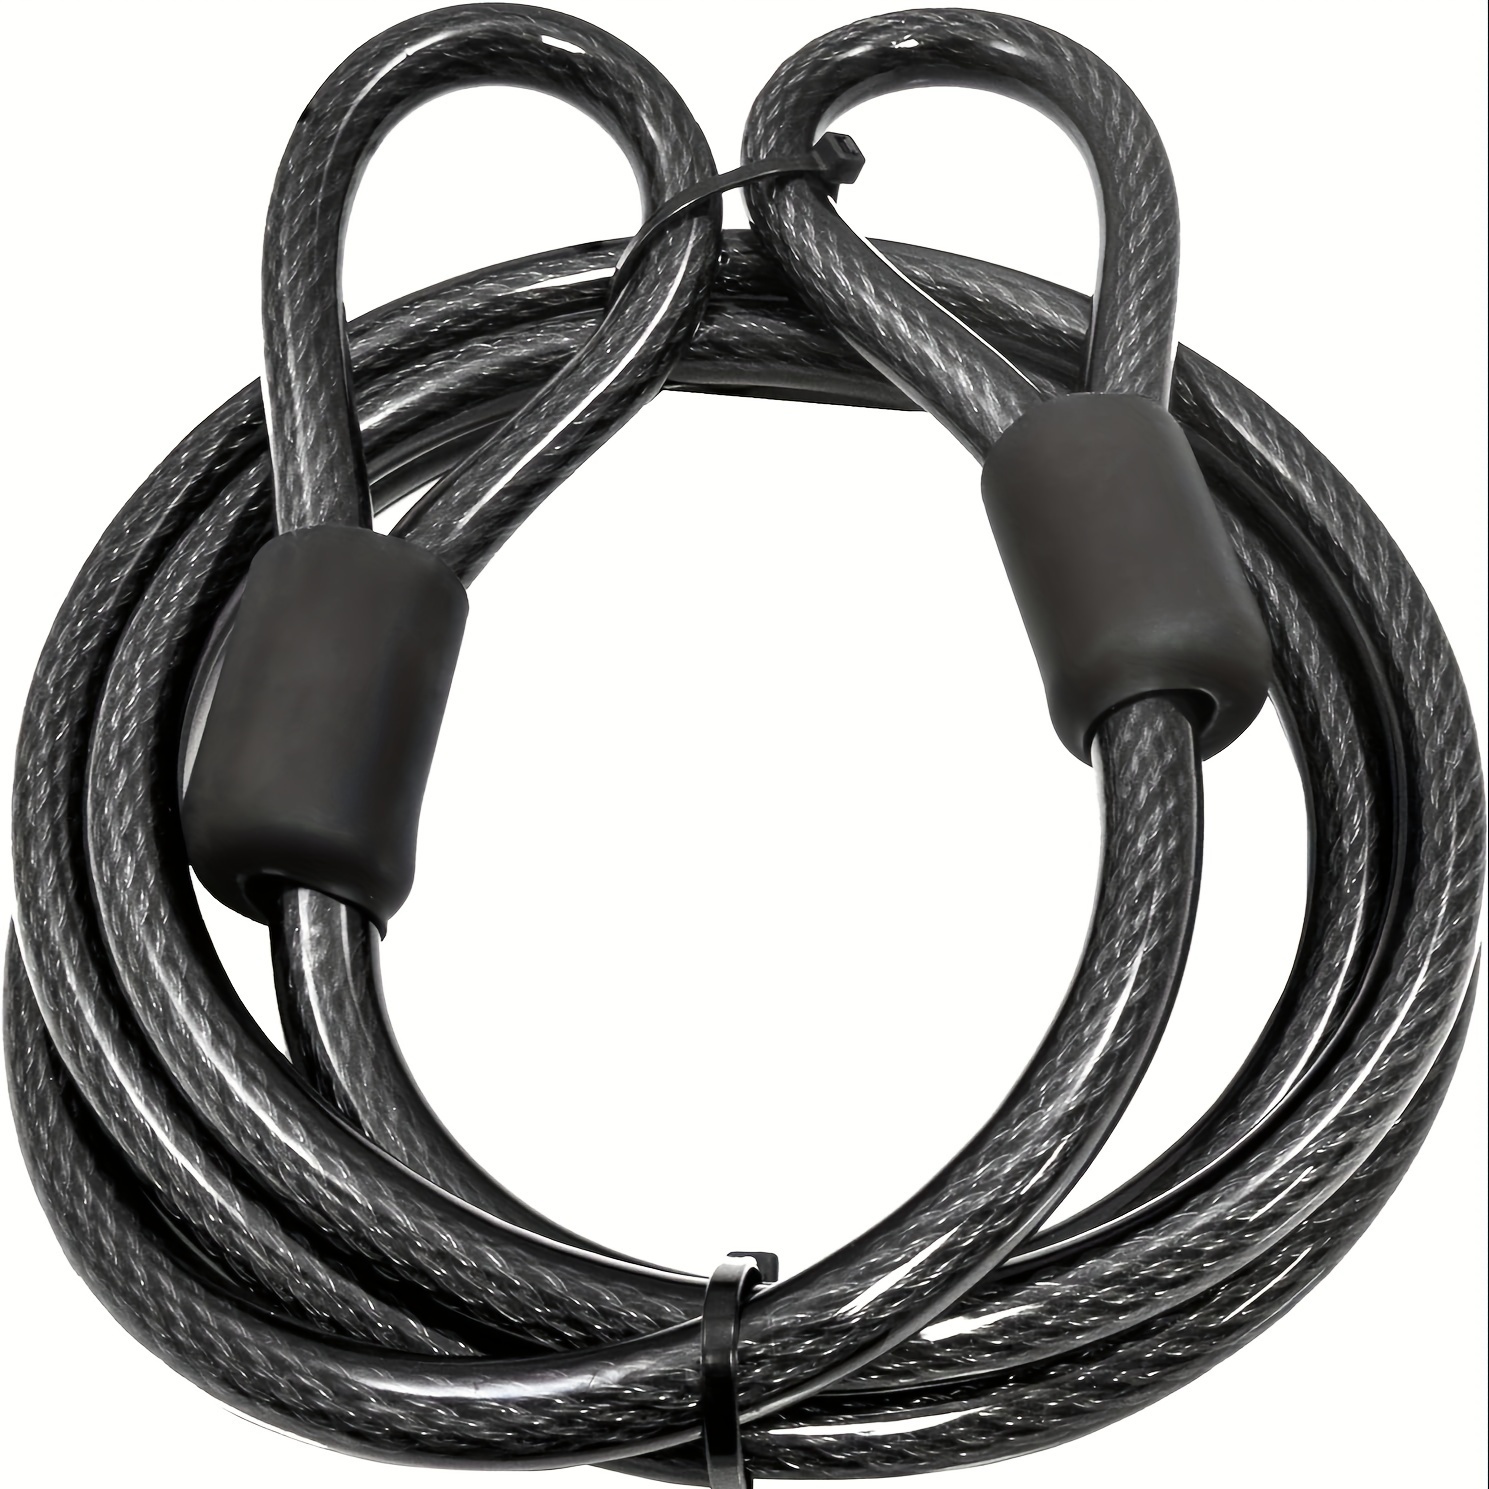 MARQUE Bike Security Steel Cable - 3/8 inch (10 mm) Thick (4', 7',15' or  30') Vinyl Coated Braided Steel with Double Sealed Looped Ends for U-Lock